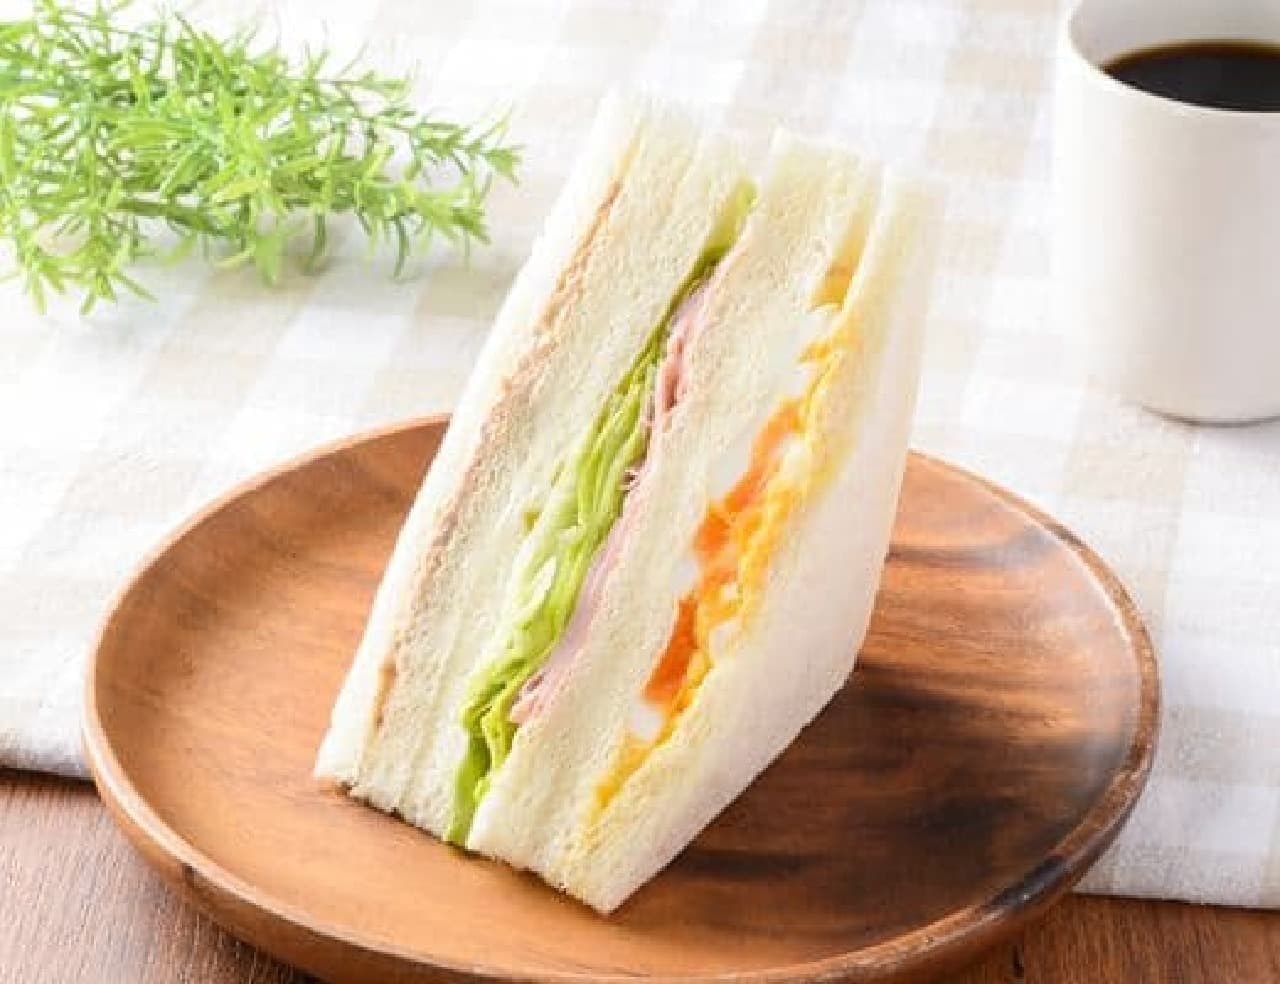 Lawson "Mixed Sandwich (Increased)"